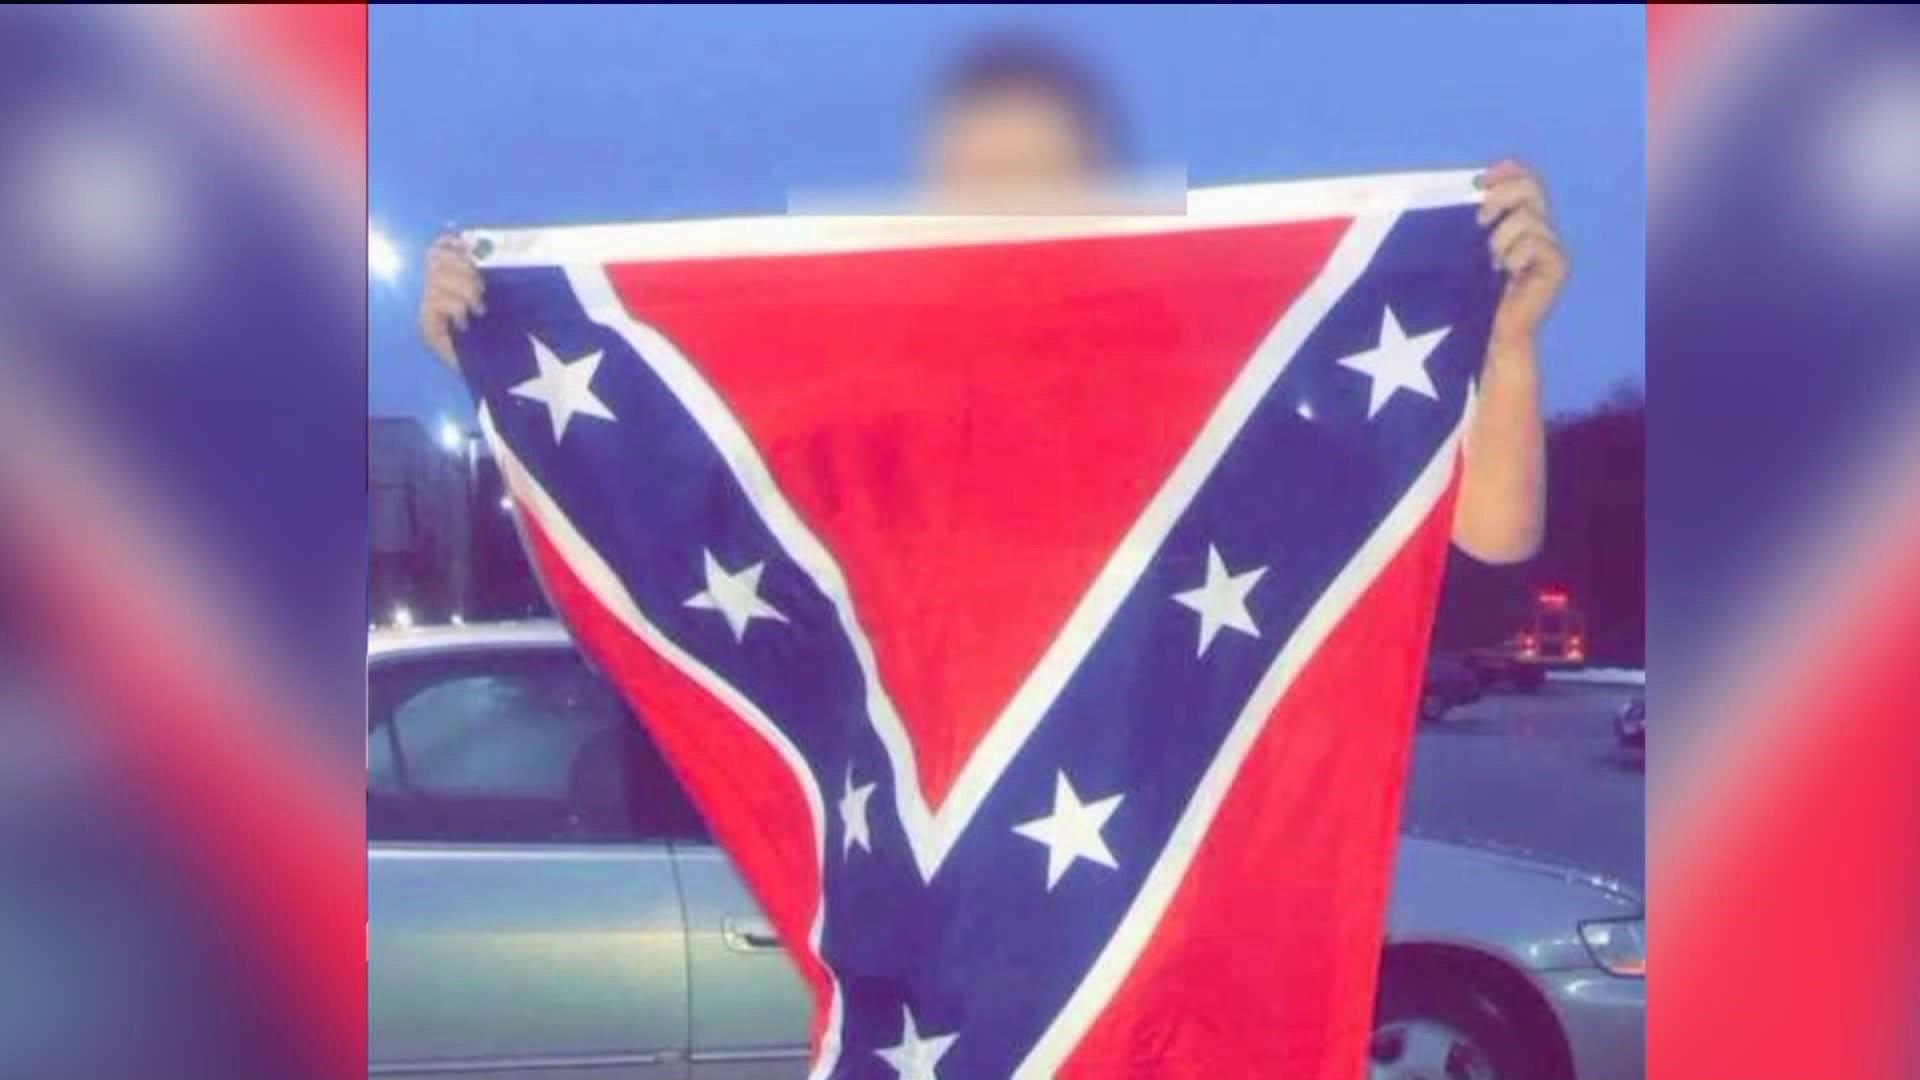 Confederate flag incident in Middletown